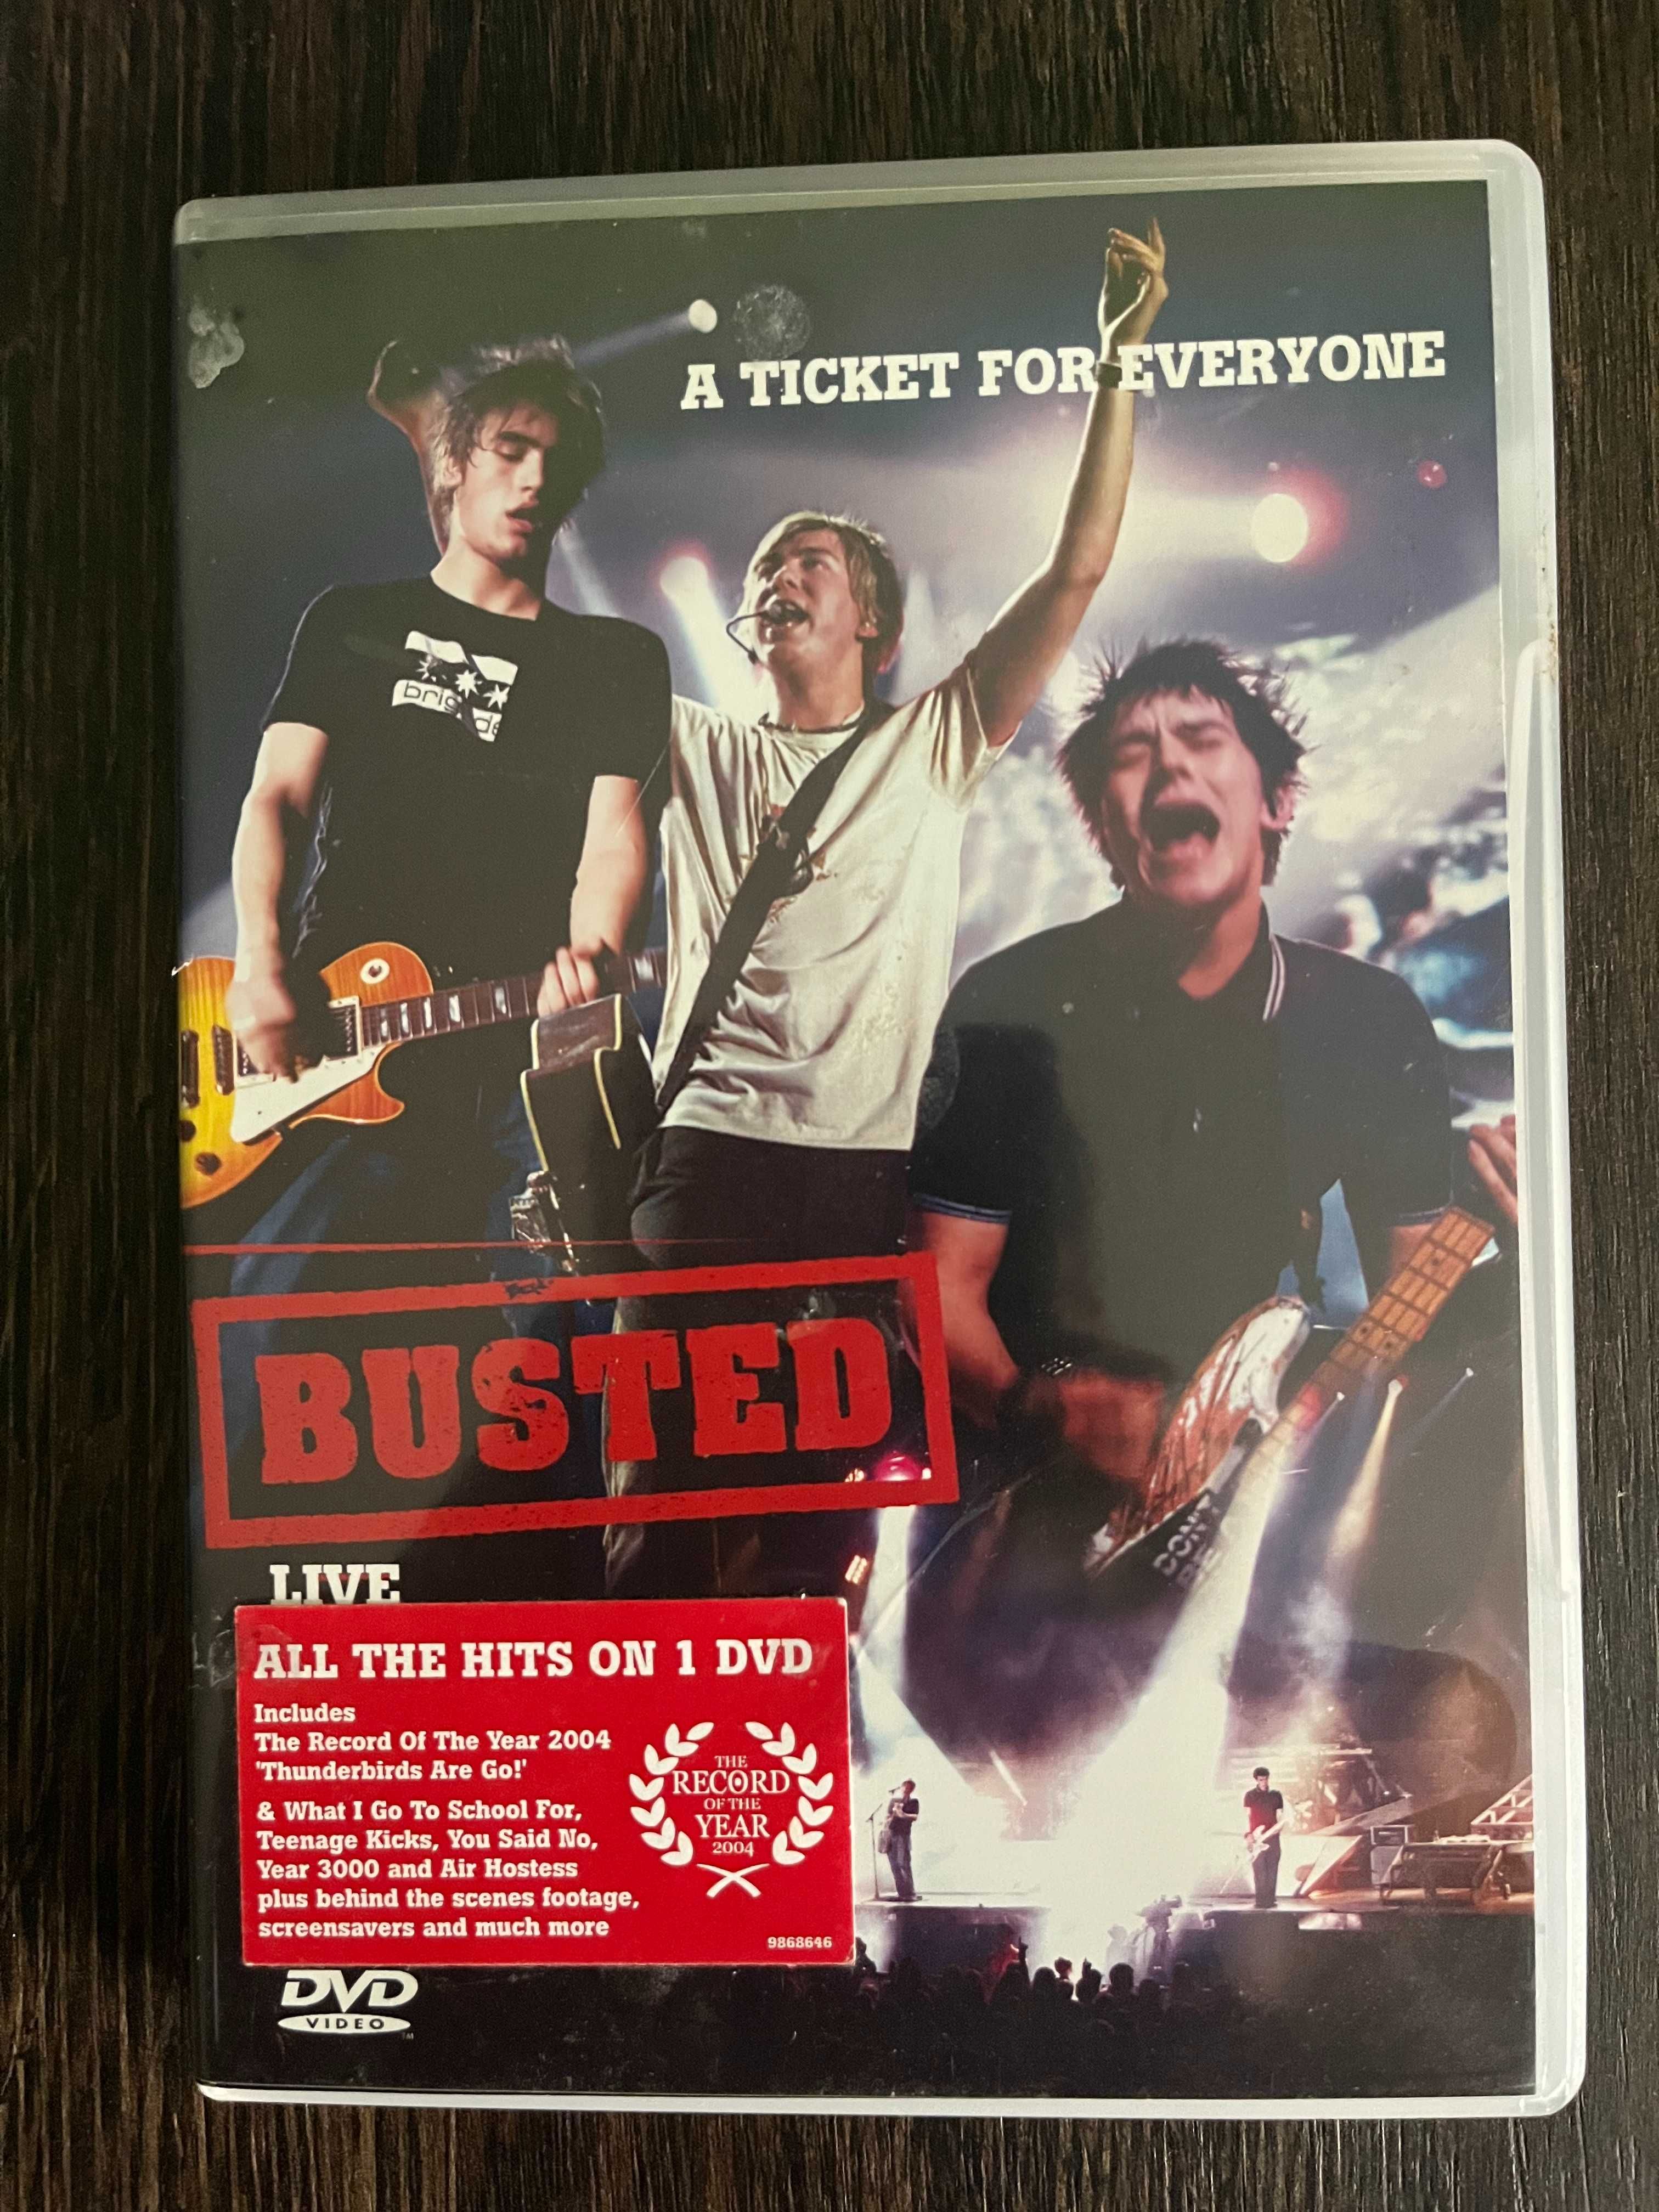 Busted – A Ticket For Everyone: Busted Live